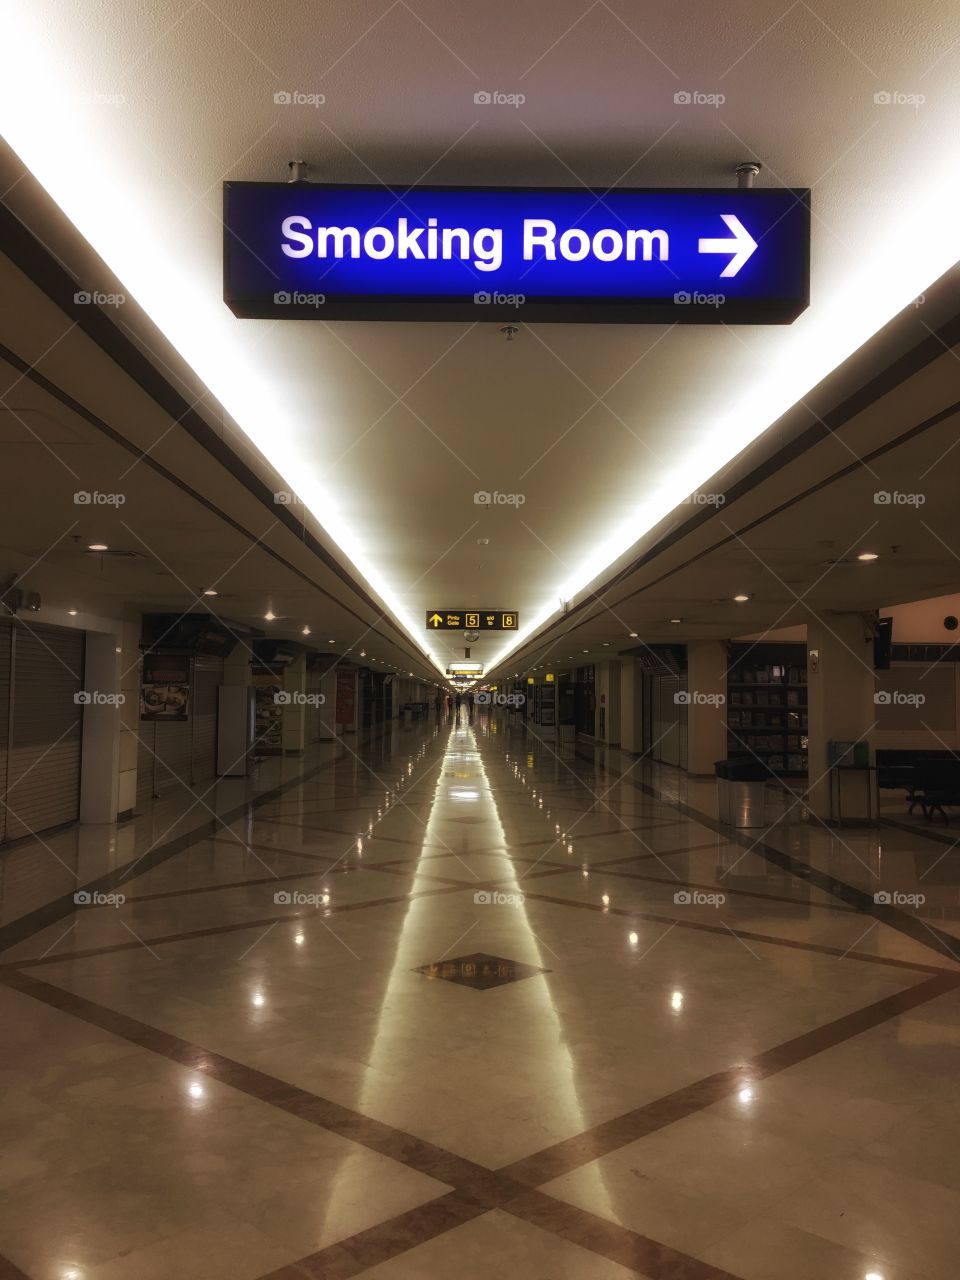 Smooking room on the right